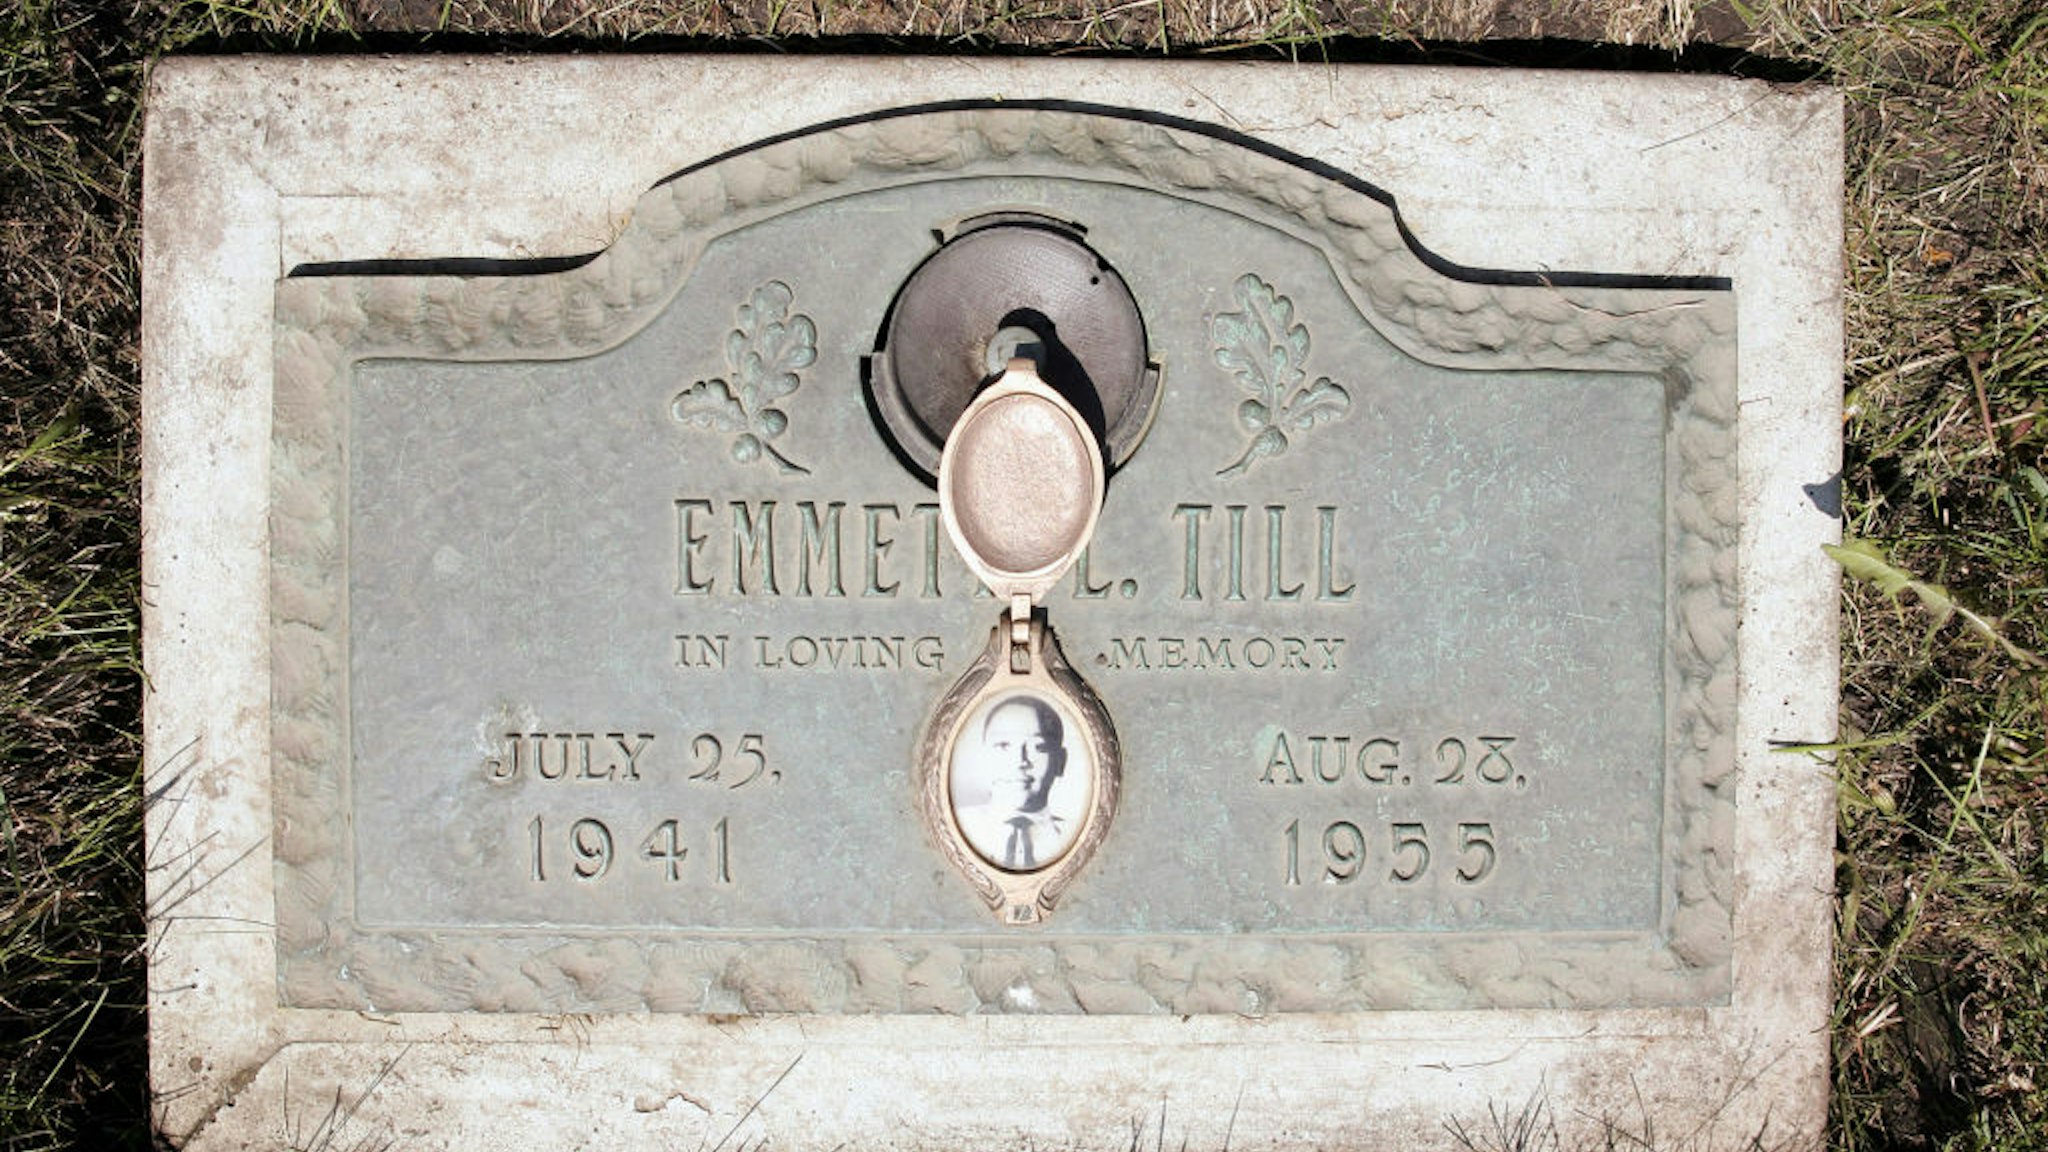 A plaque marks the gravesite of Emmett Till at Burr Oak Cemetery May 4, 2005 in Aslip, Illinois.